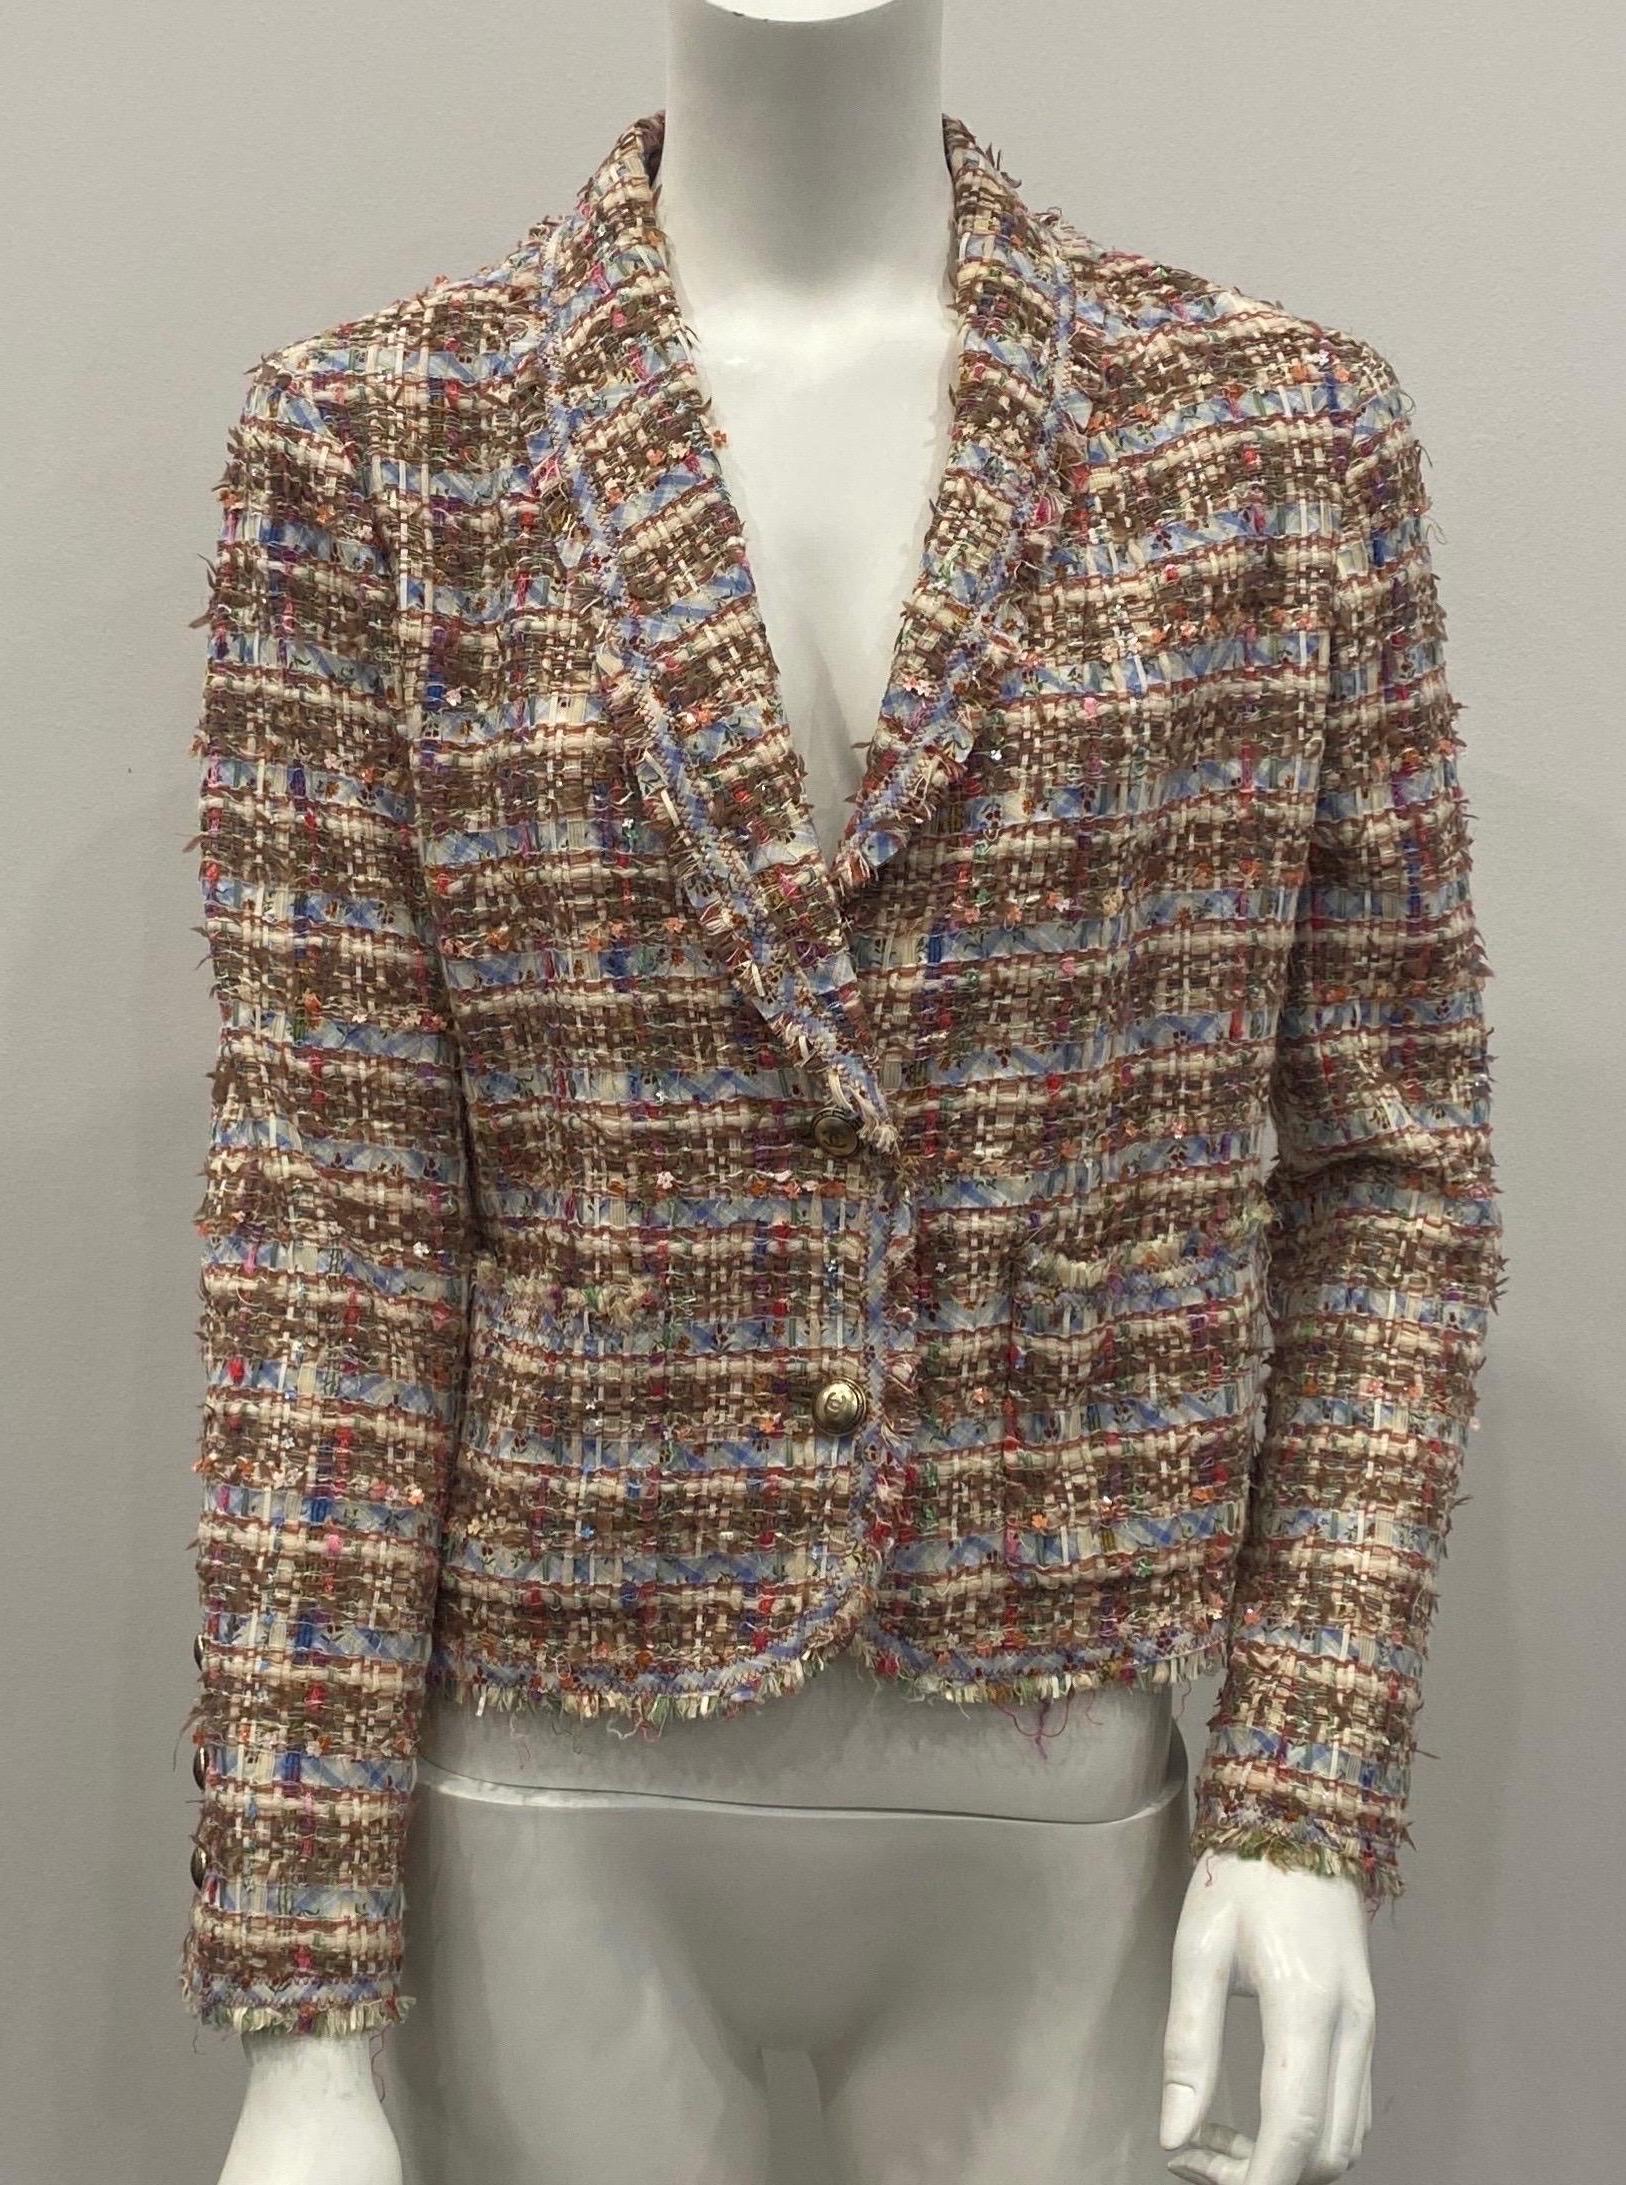 Chanel Multicolor Ribbon Boucle Jacket -Size 40 - 2005P The fabric of this jacket is a boucle made up of multi color and size ribbons woven throughout with tiny multi color flower shaped sequins to give it that final touch. Very classic of the